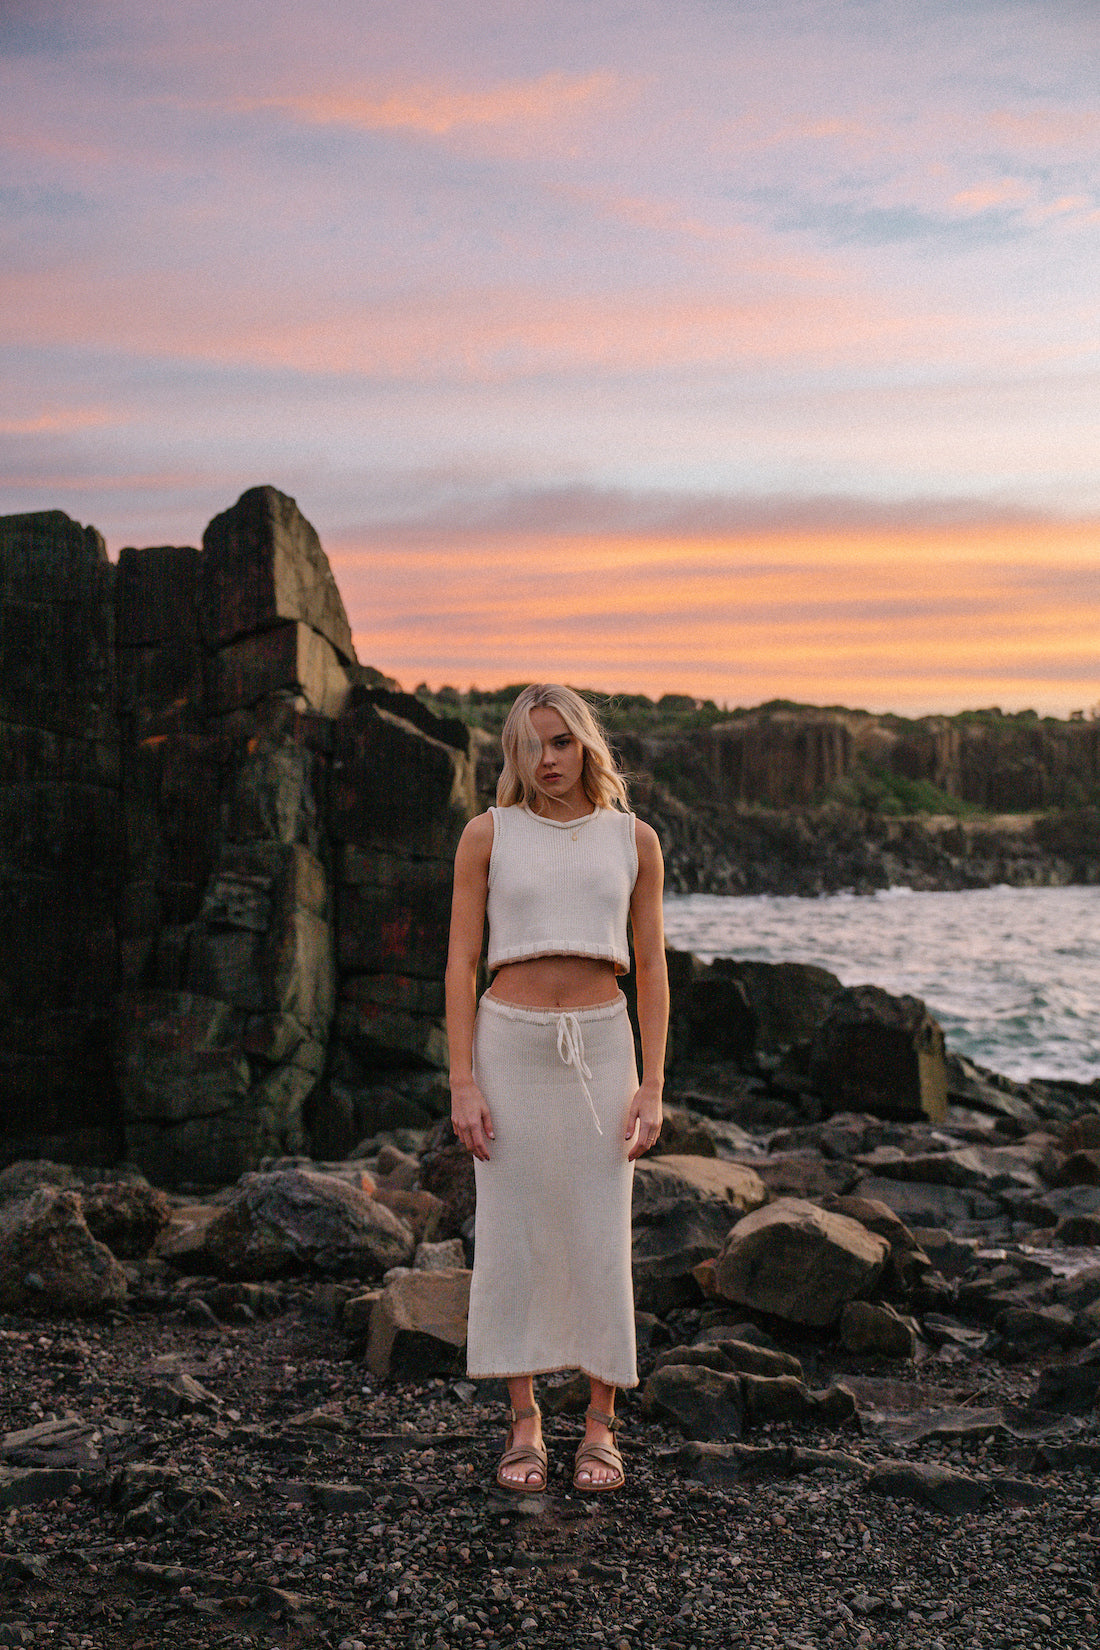 Matching Co-Ord Knitwear Set | Beachy sustainable fashion Australia | Coastal Designs that are comfy | Malia The Label